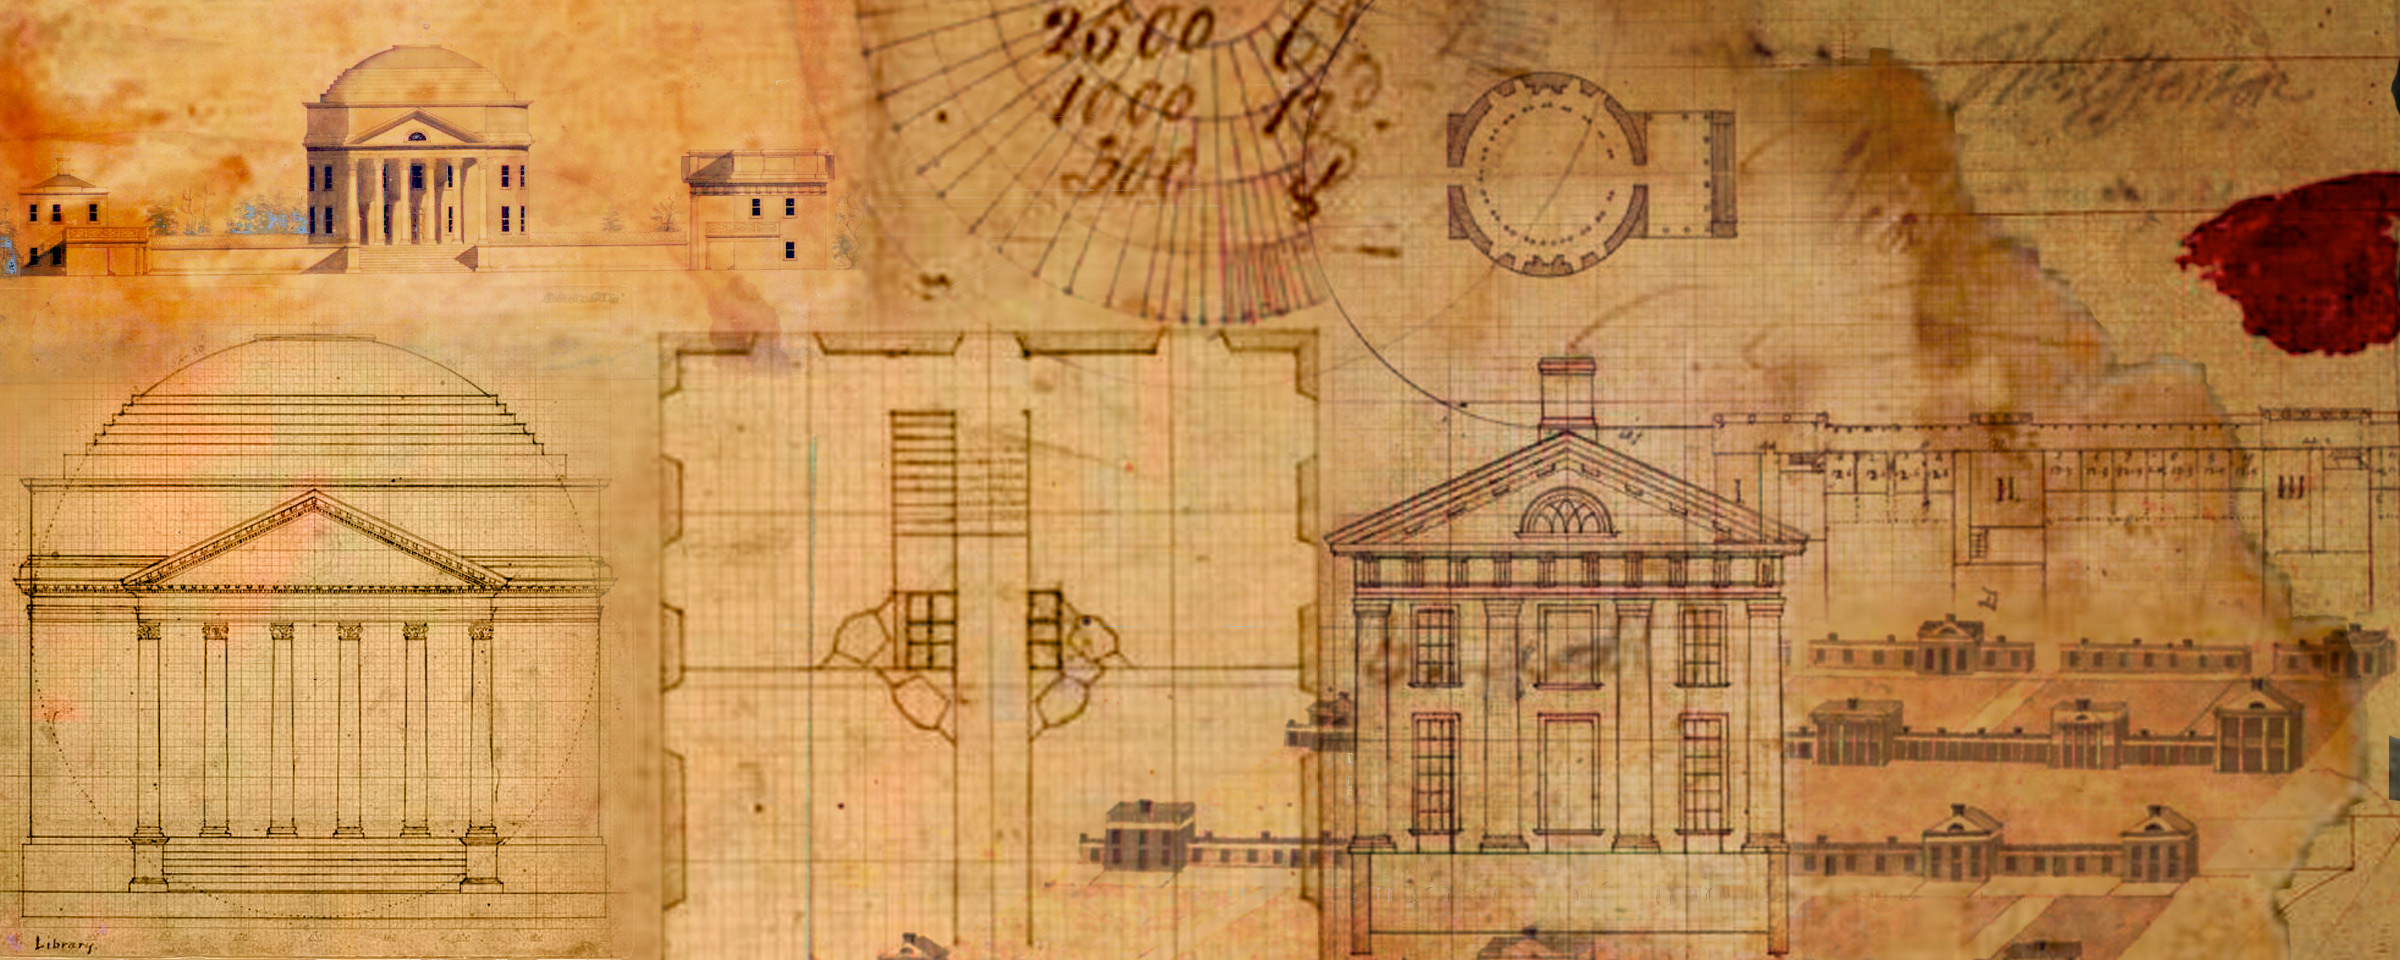 Architectural drawings of Monticello